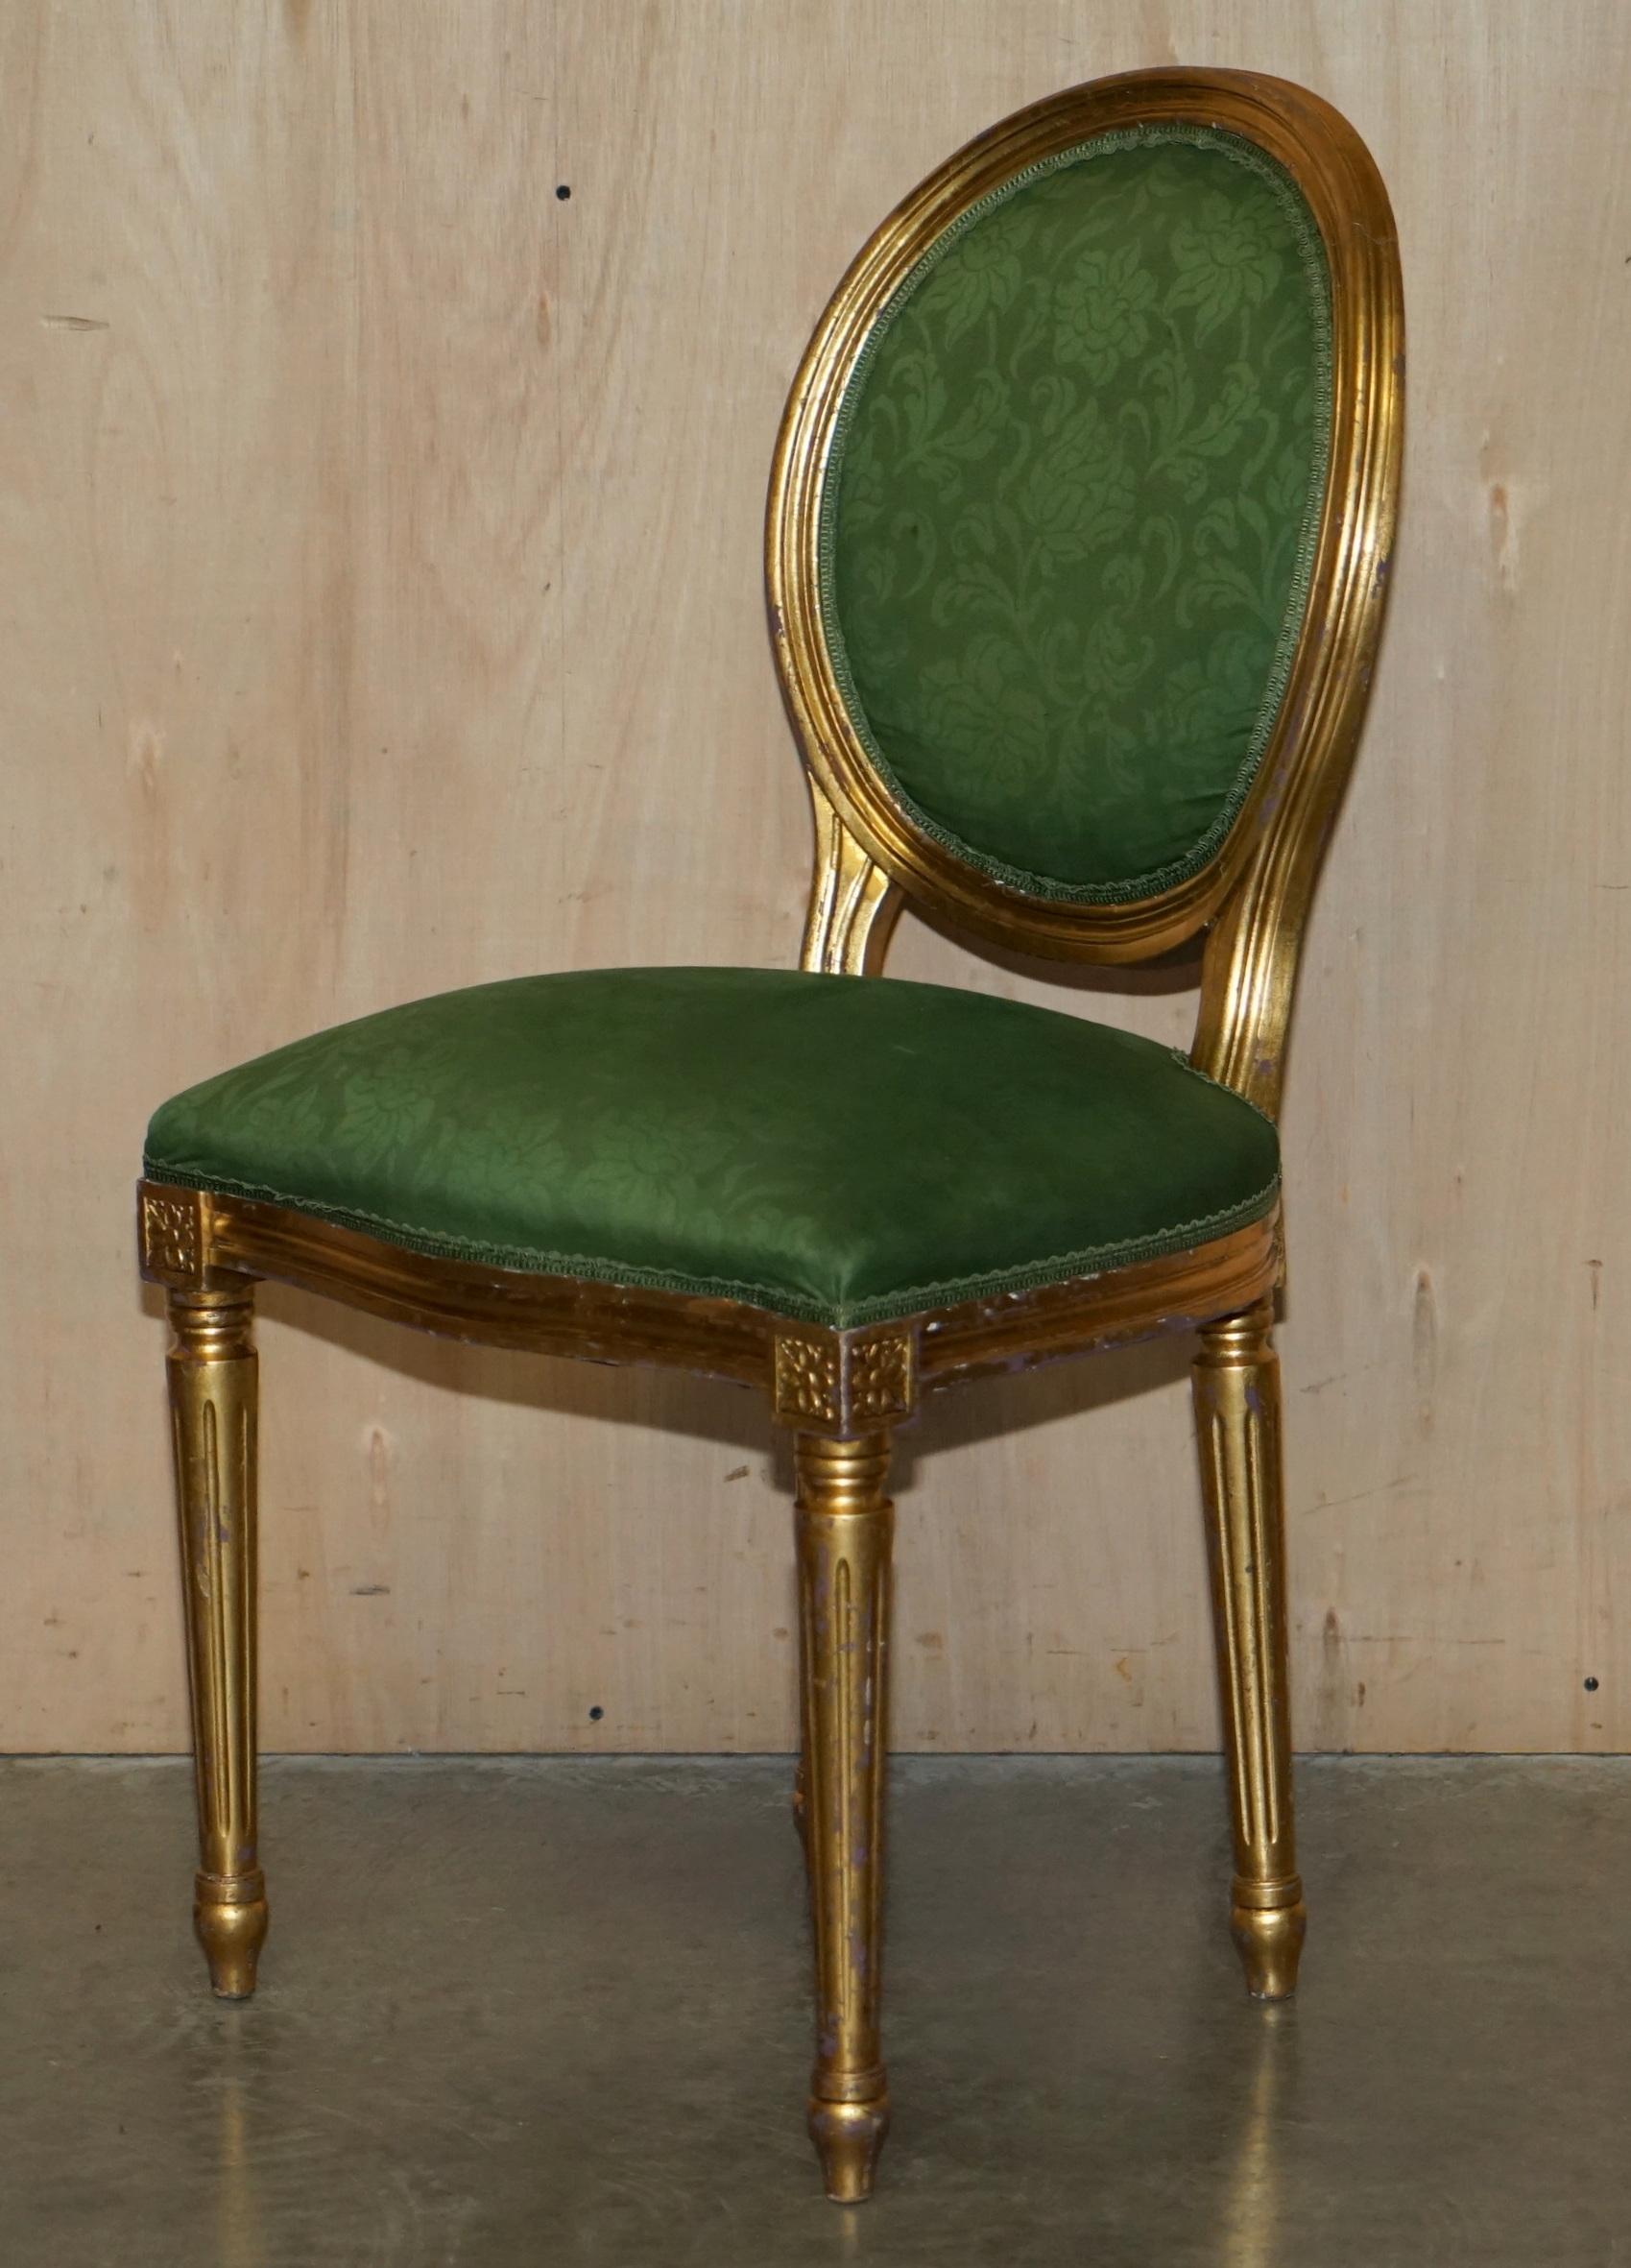 EiGHT ANTIQUE LOUIS XVI  Style DINING CHAIRS FROM LADY DIANA'S SPENCER HOUSE 8 (Hochviktorianisch) im Angebot